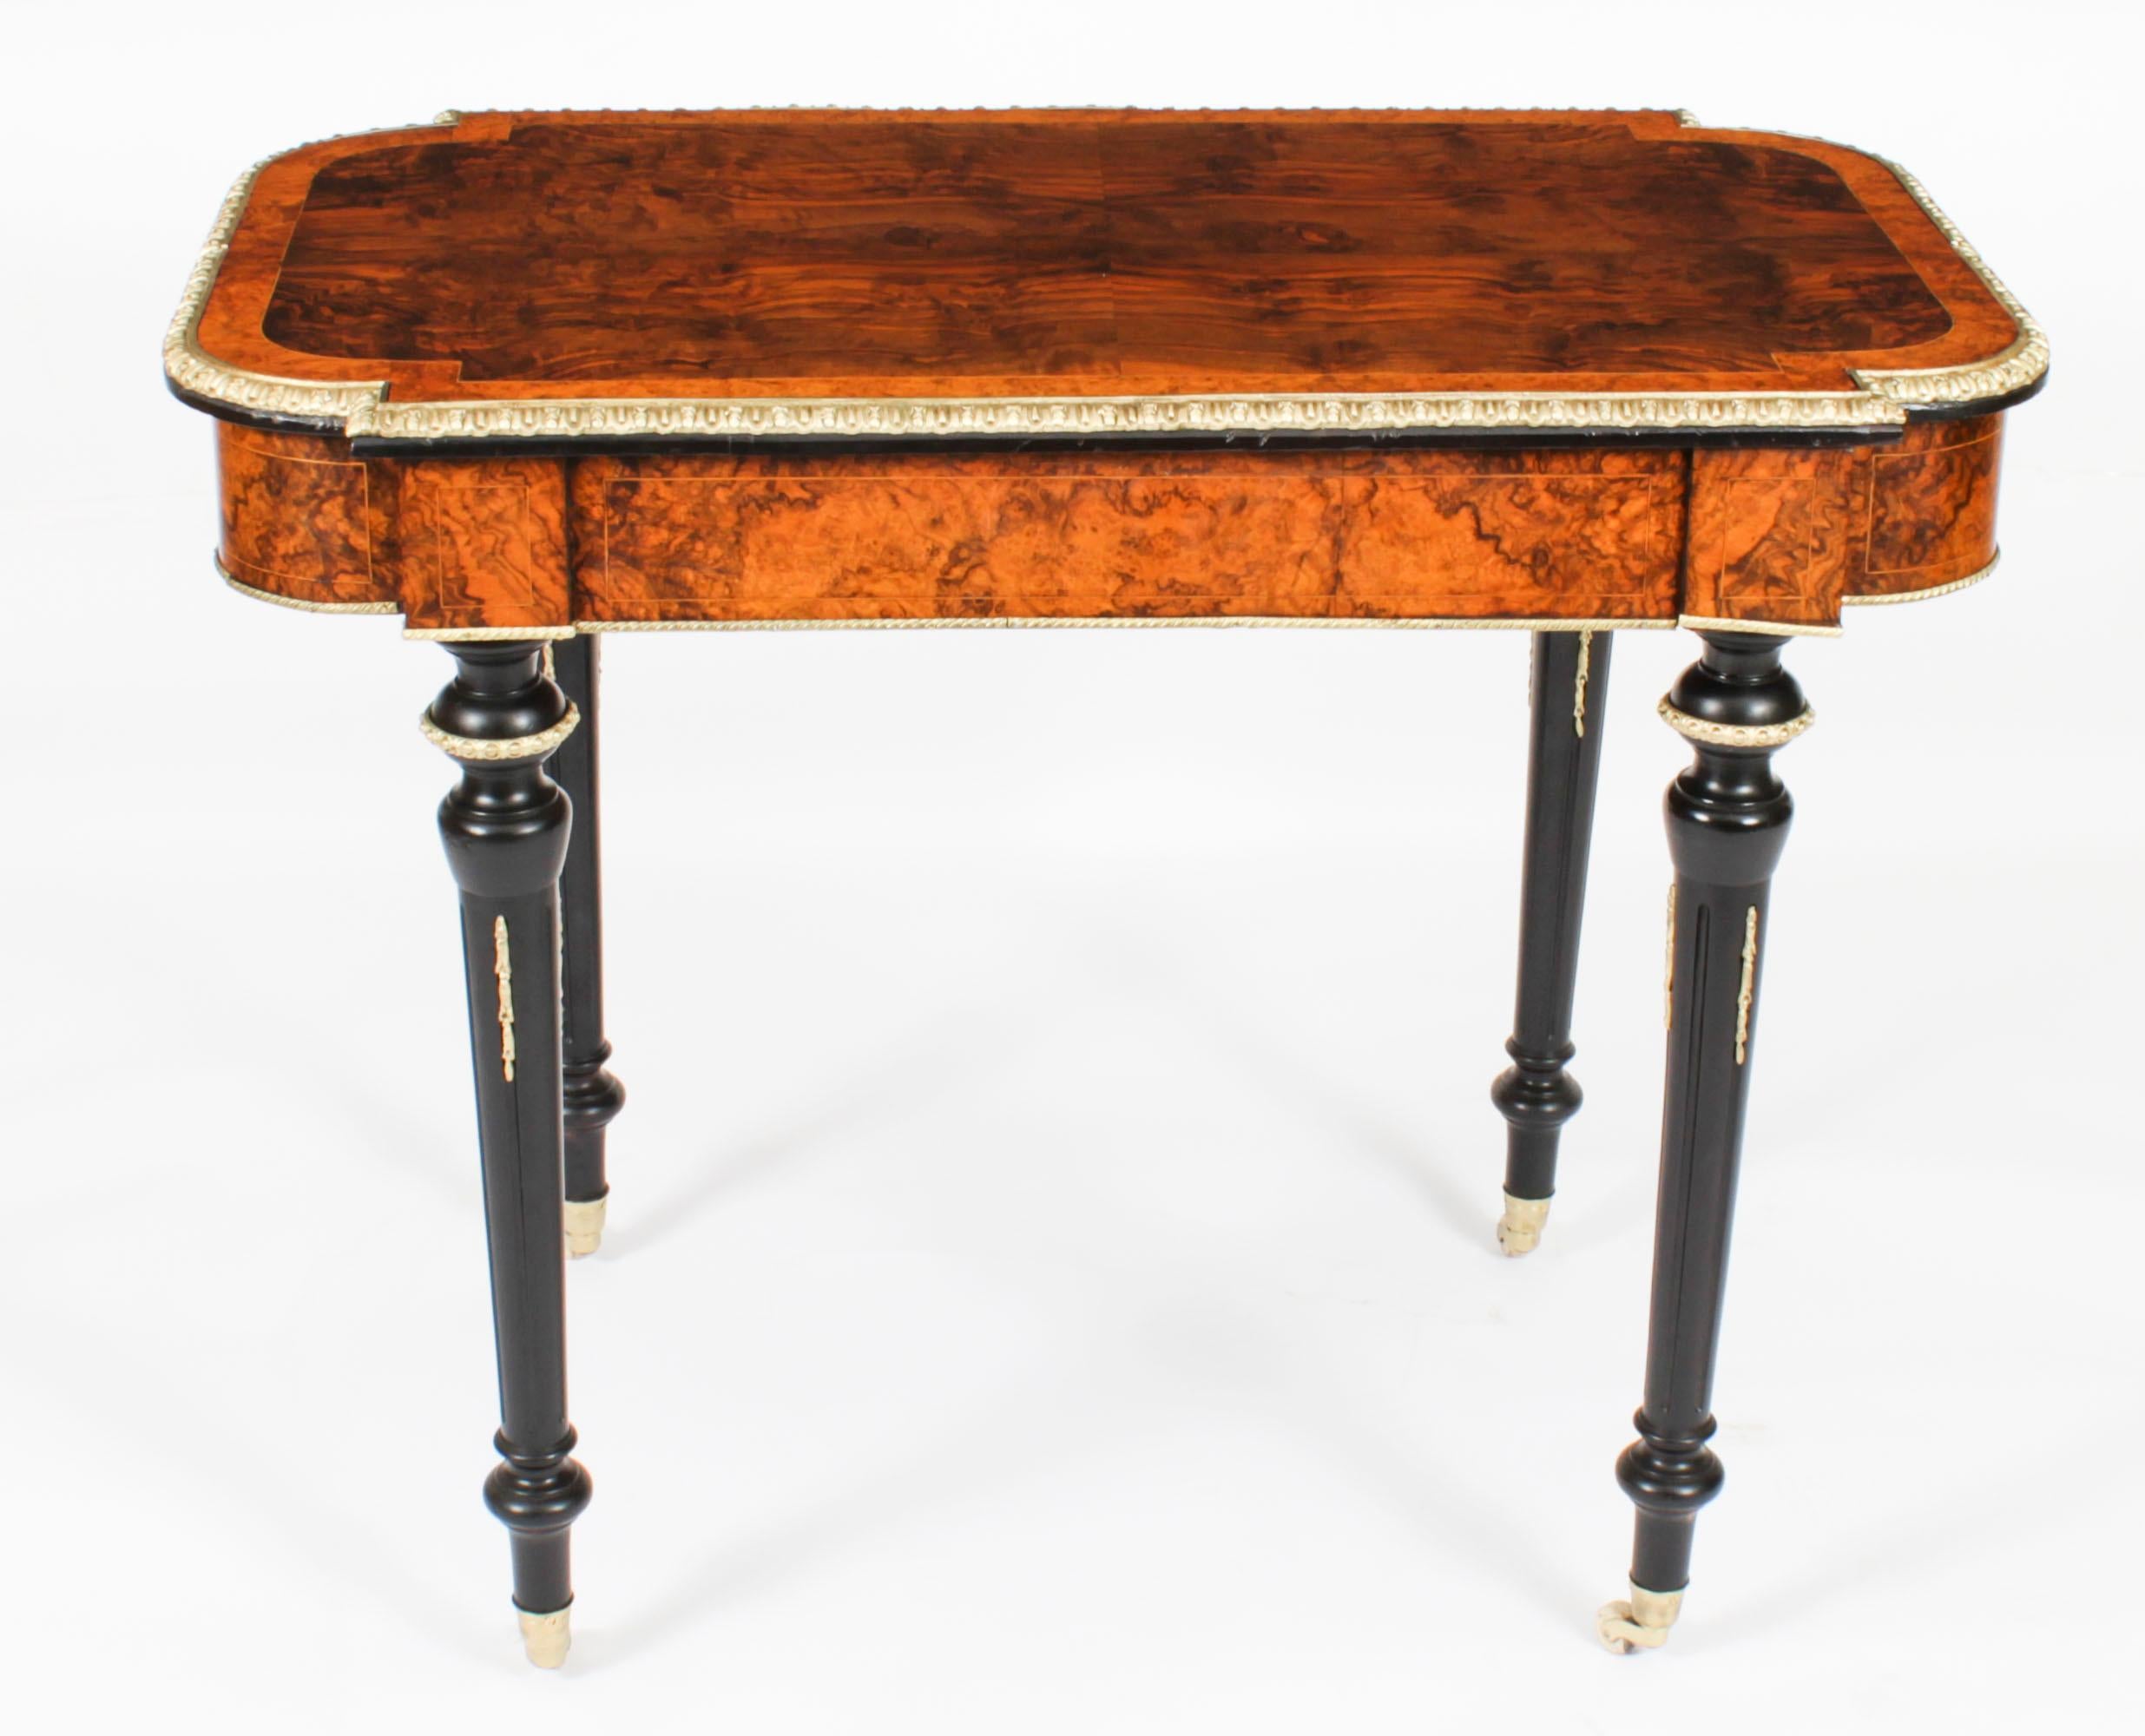 Antique French Burr Walnut Sevres & Ormolu Mounted Writing Table Desk 19th C For Sale 13